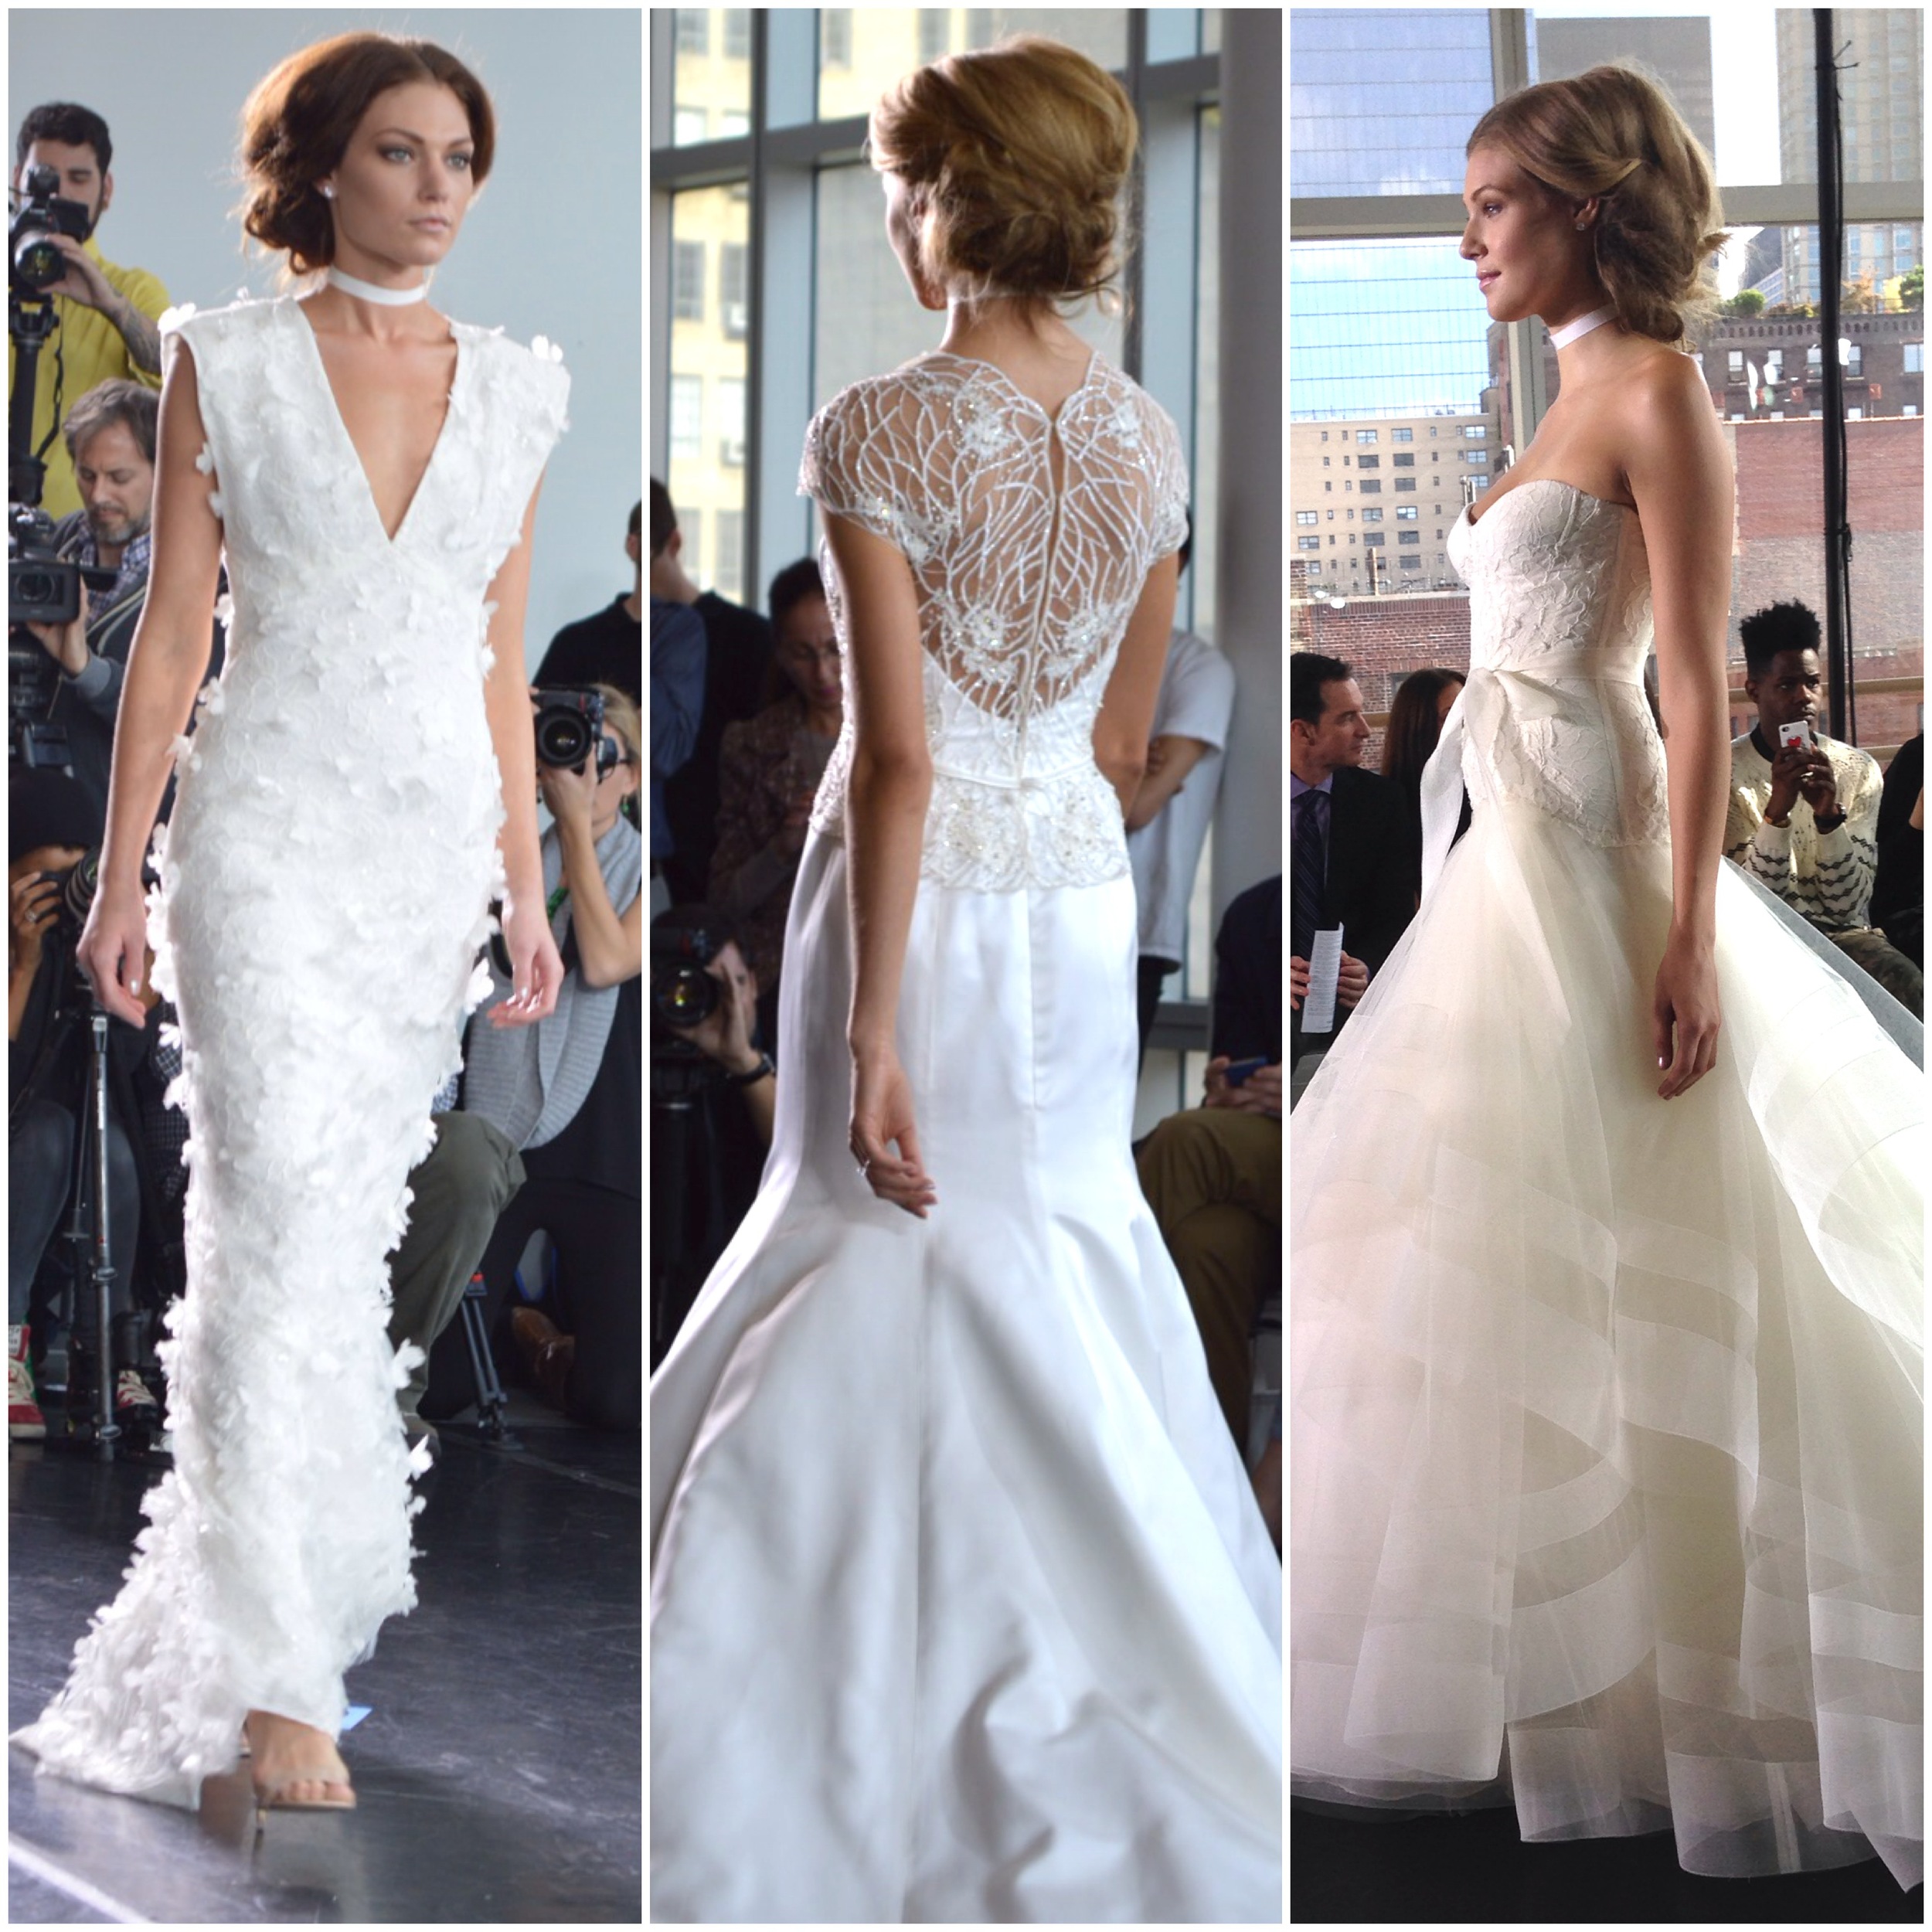 The GORGEOUS Rivini show. Always one of the best venues of Bridal Market, and the gowns were just beautiful. 